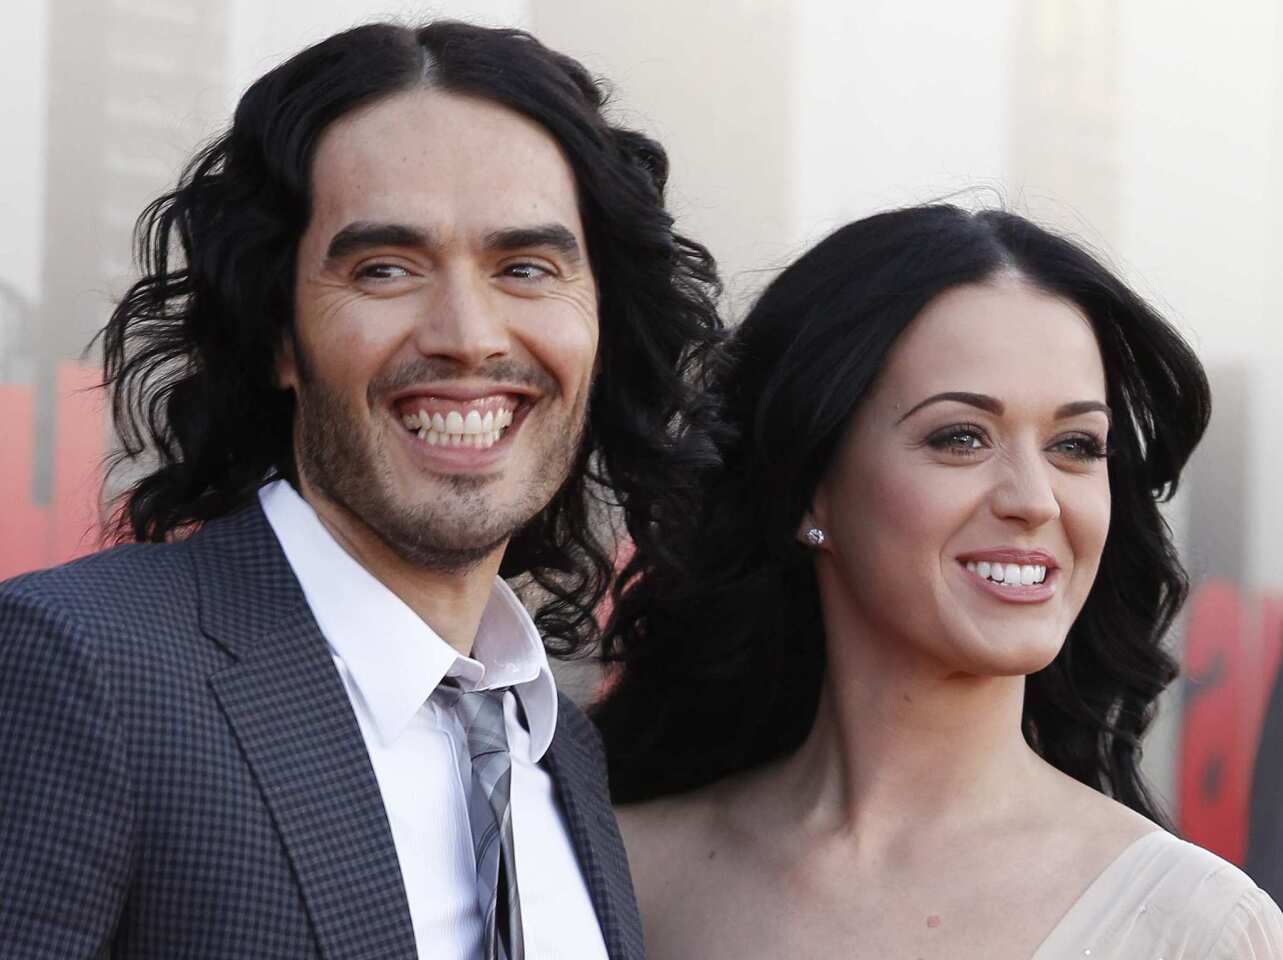 Katy Perry and Russell Brand play nice